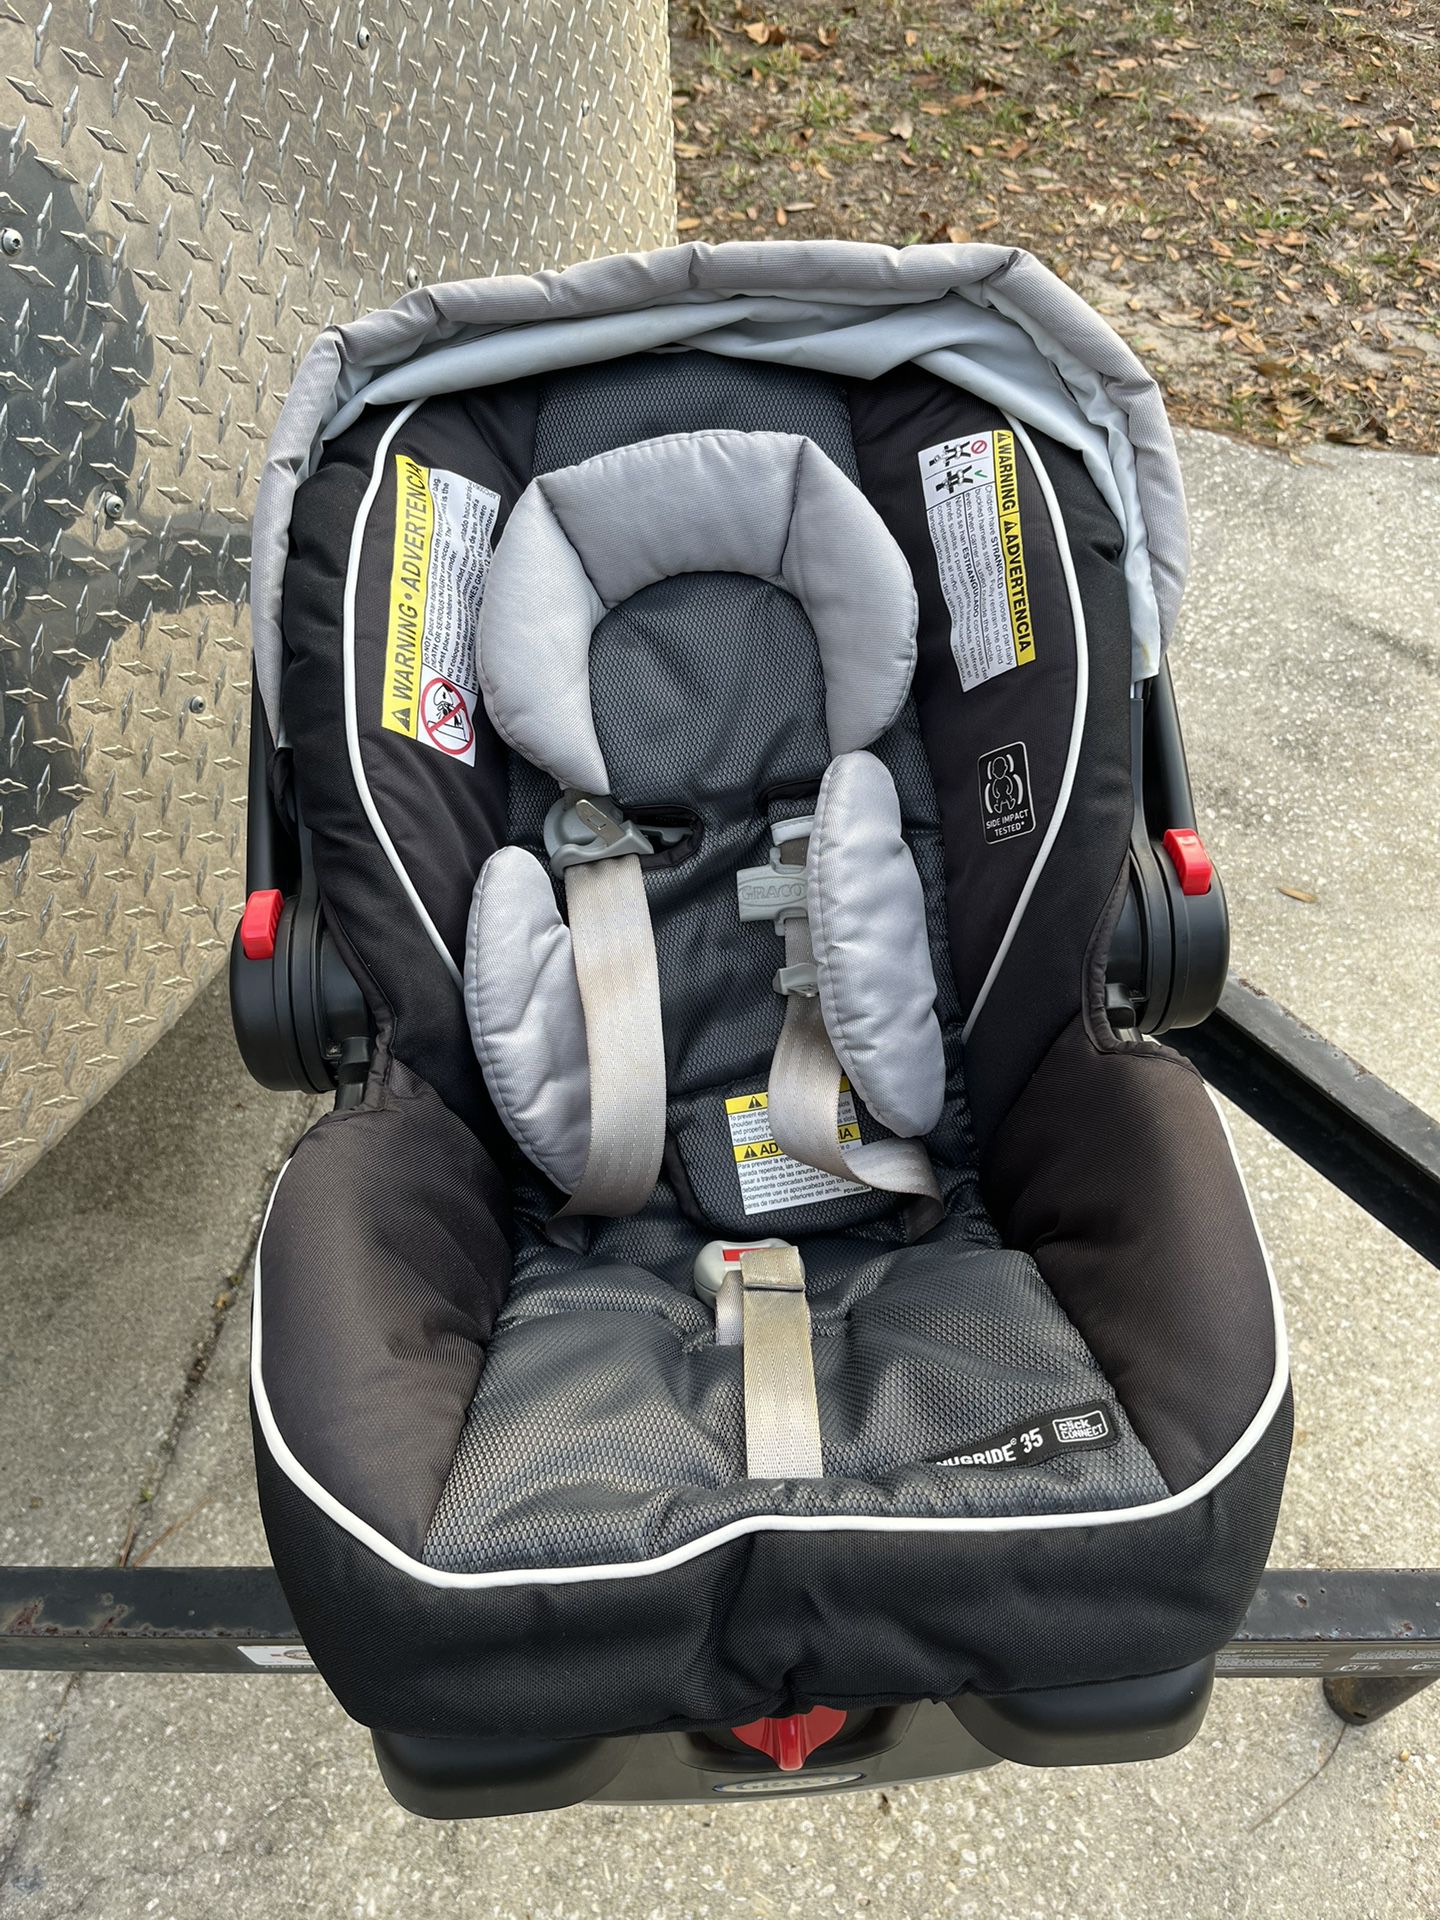 Graco Infant Carseat